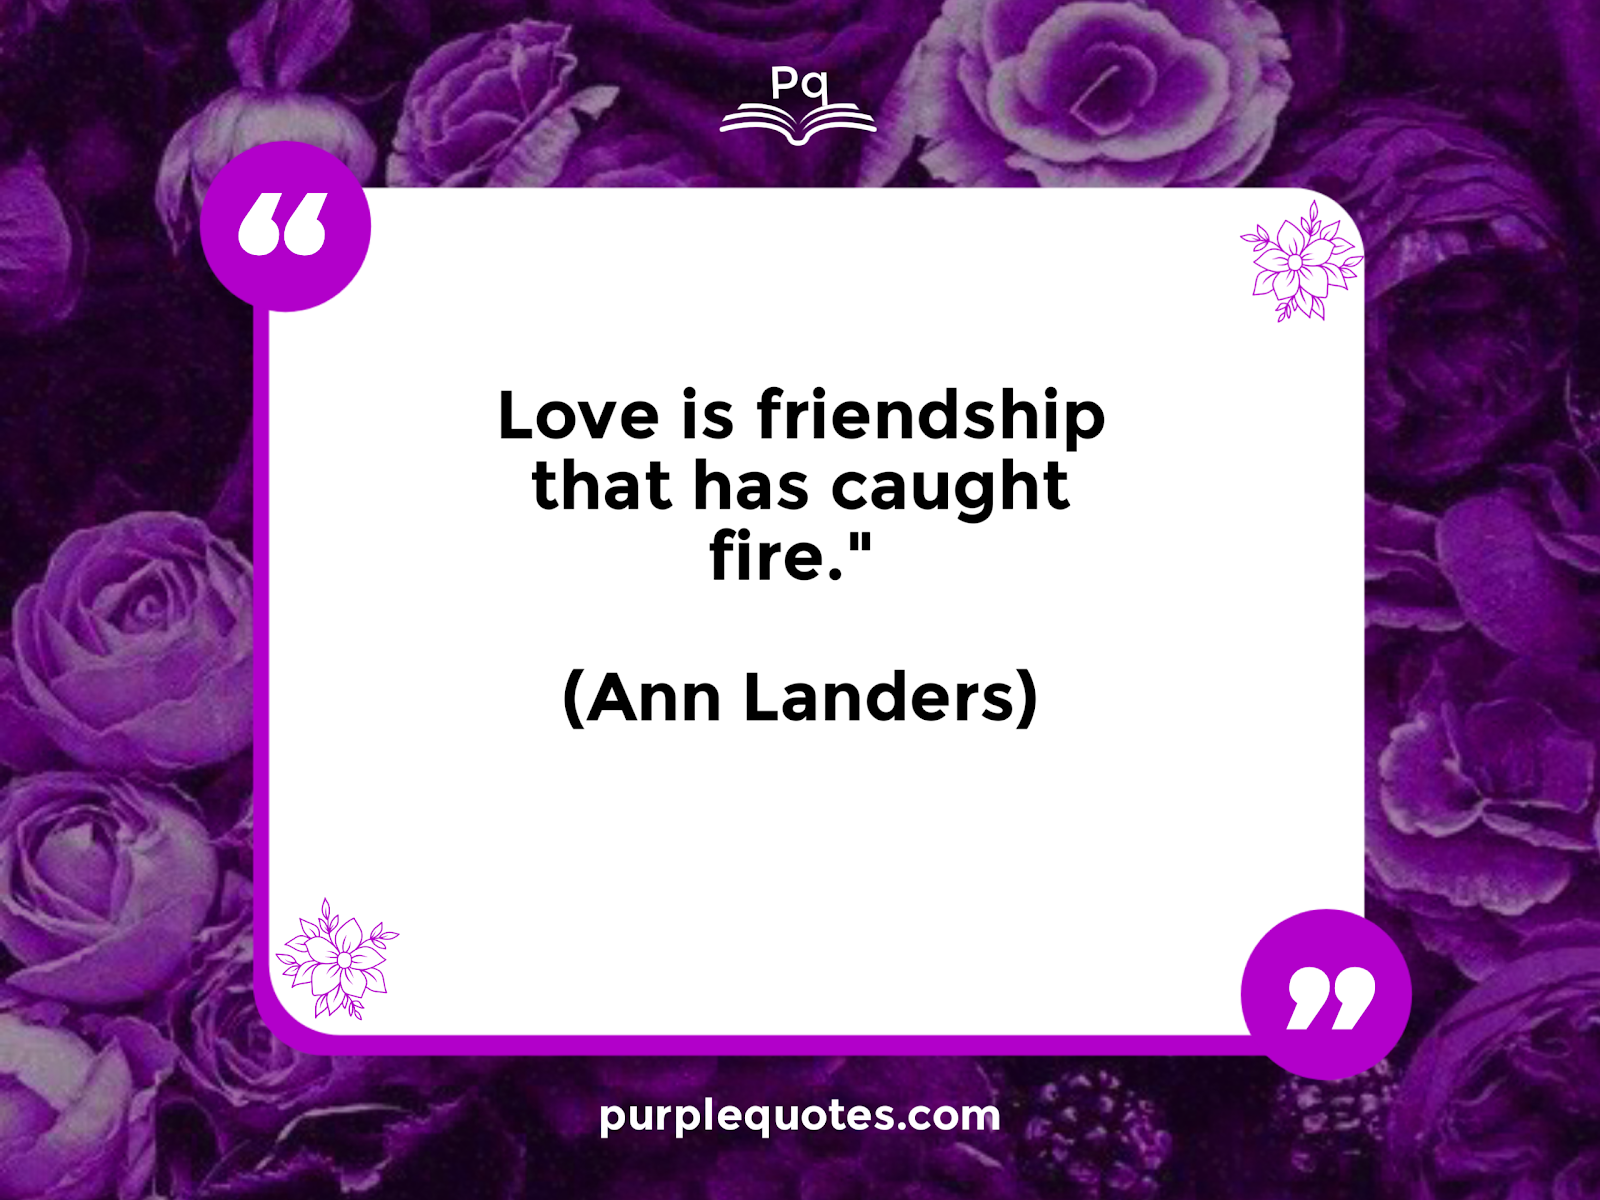 love is friendship that has caught fire, quote by Ann Landers